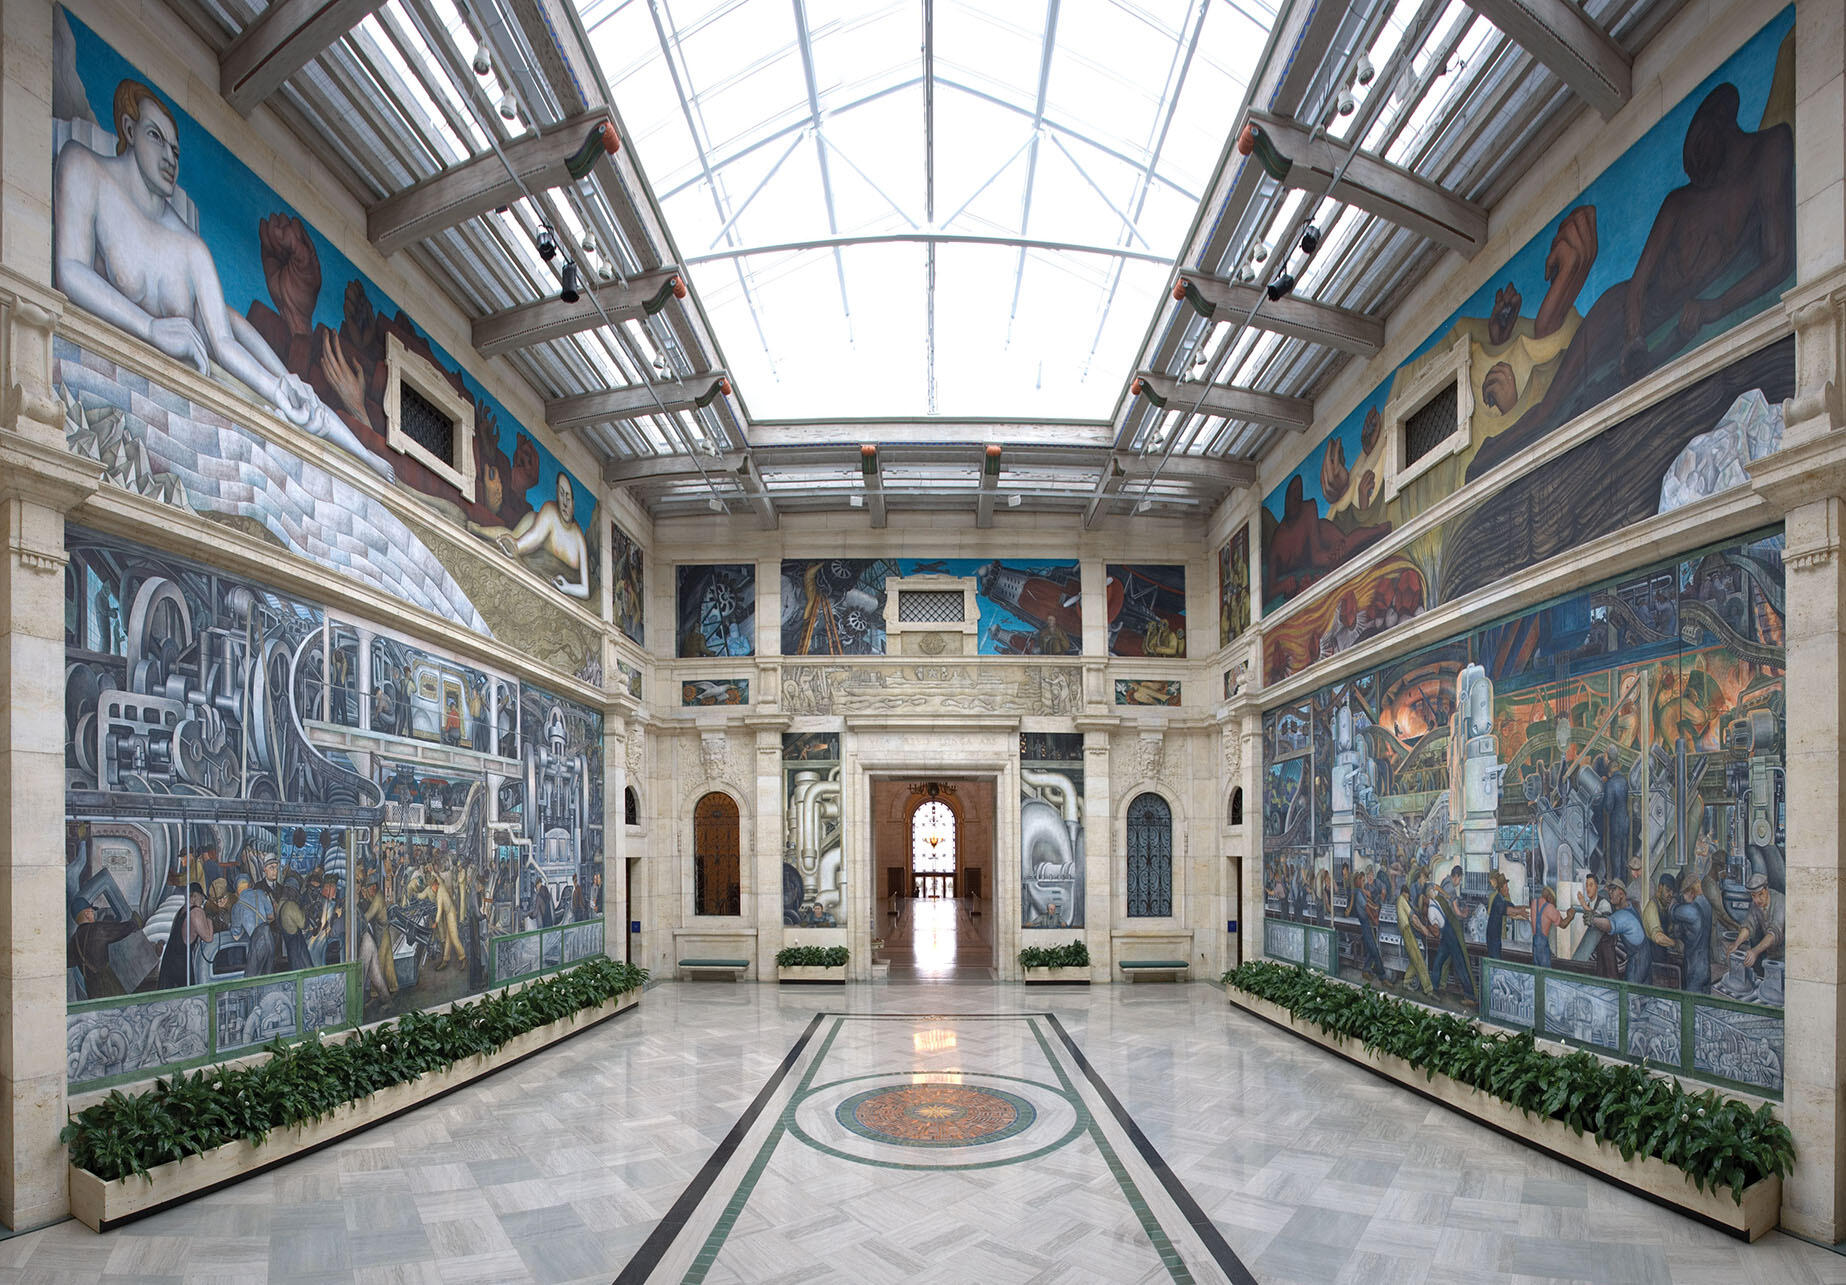 The Rivera Court at the Detroit Institute of Arts. (Photo courtesy of the Detroit Institute of Arts.)